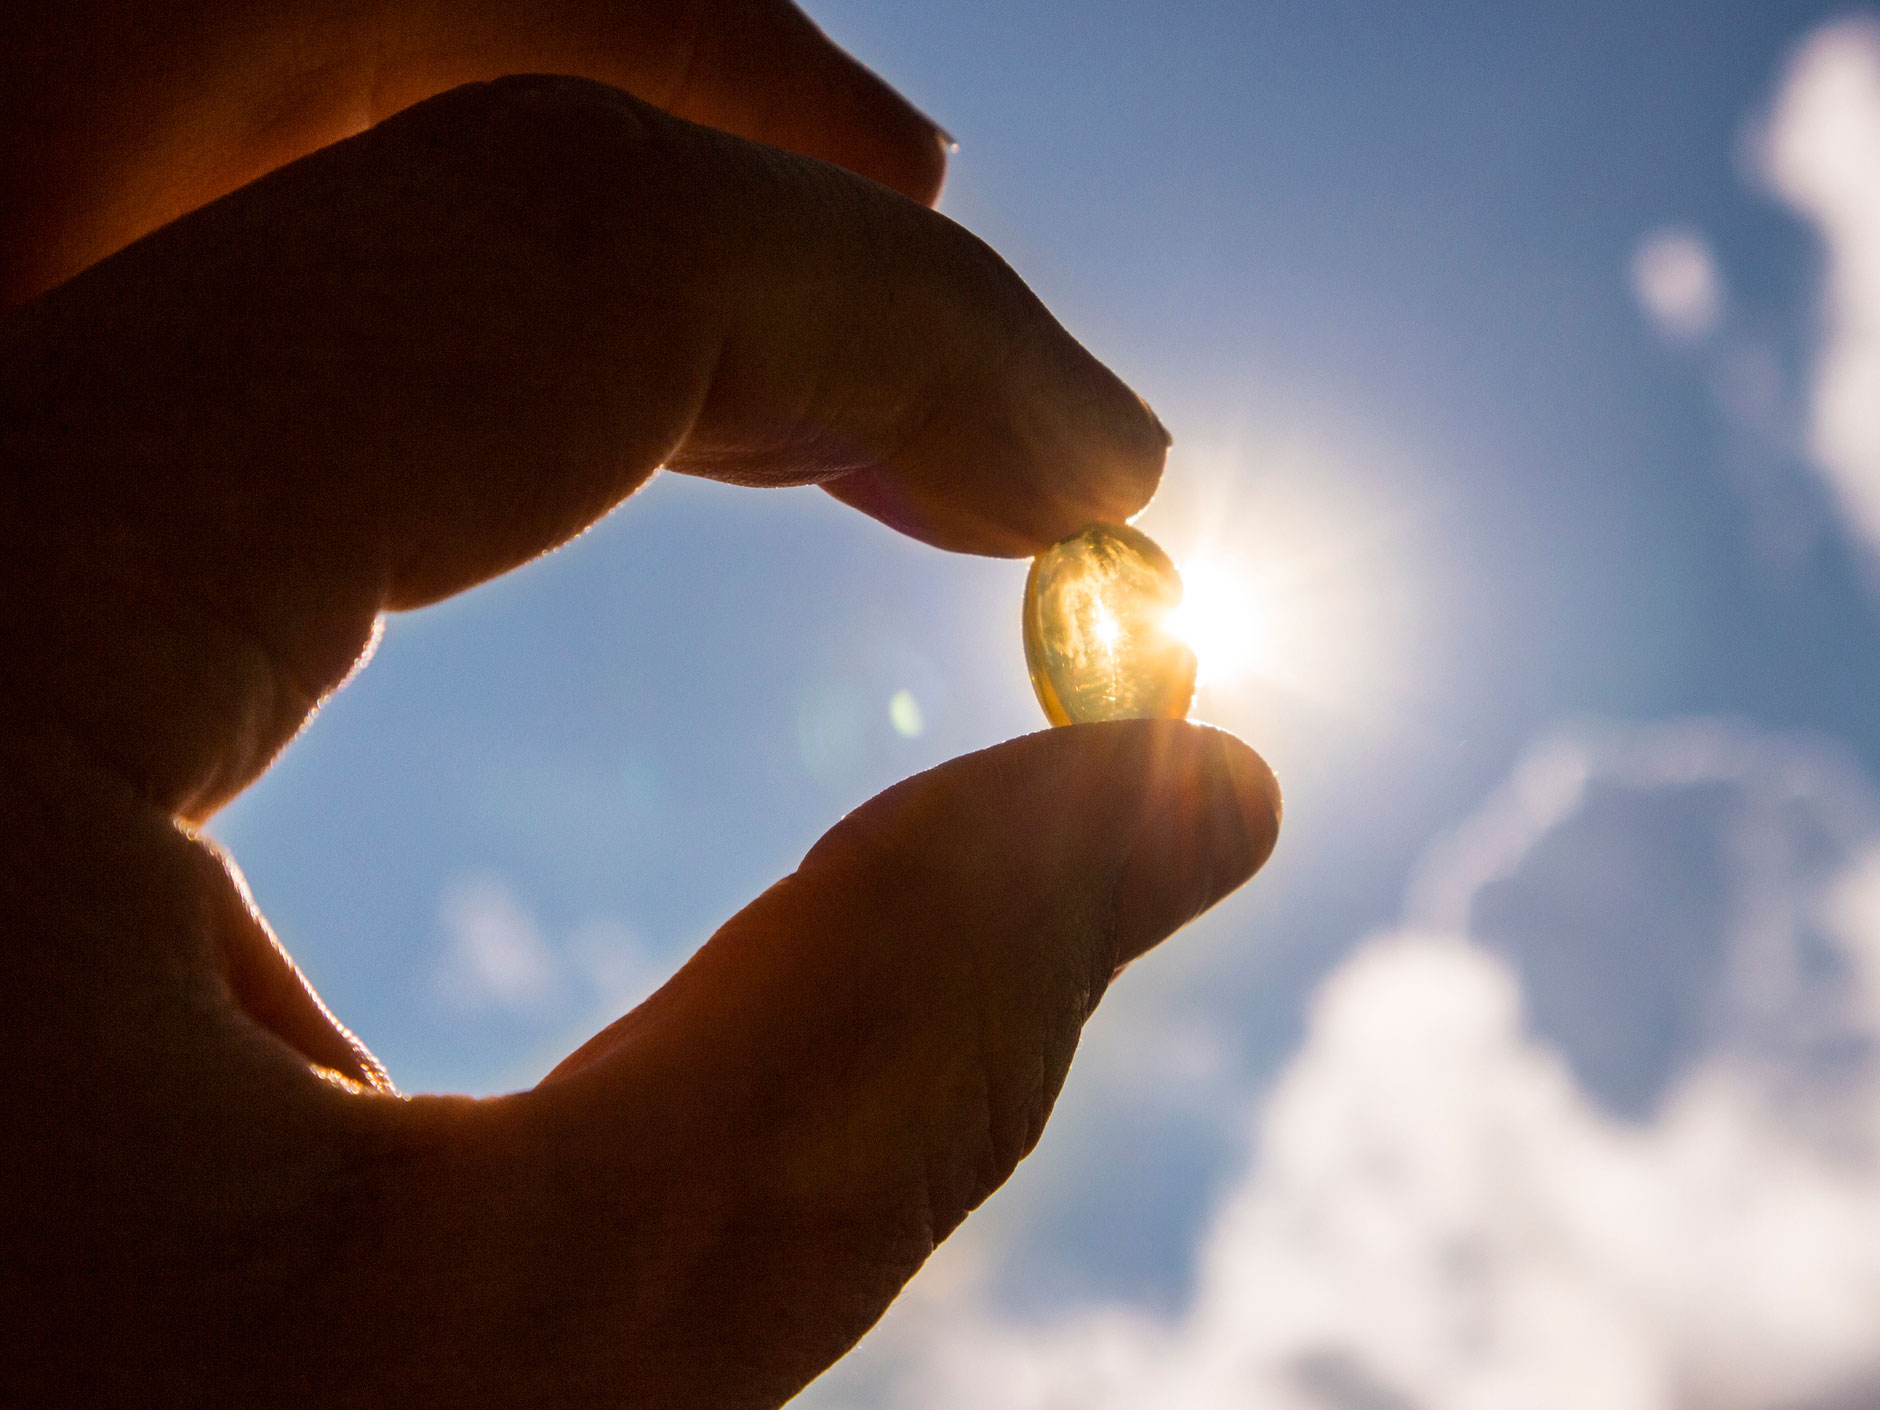 Does your vitamin D level play a role in your COVID-19 risk?